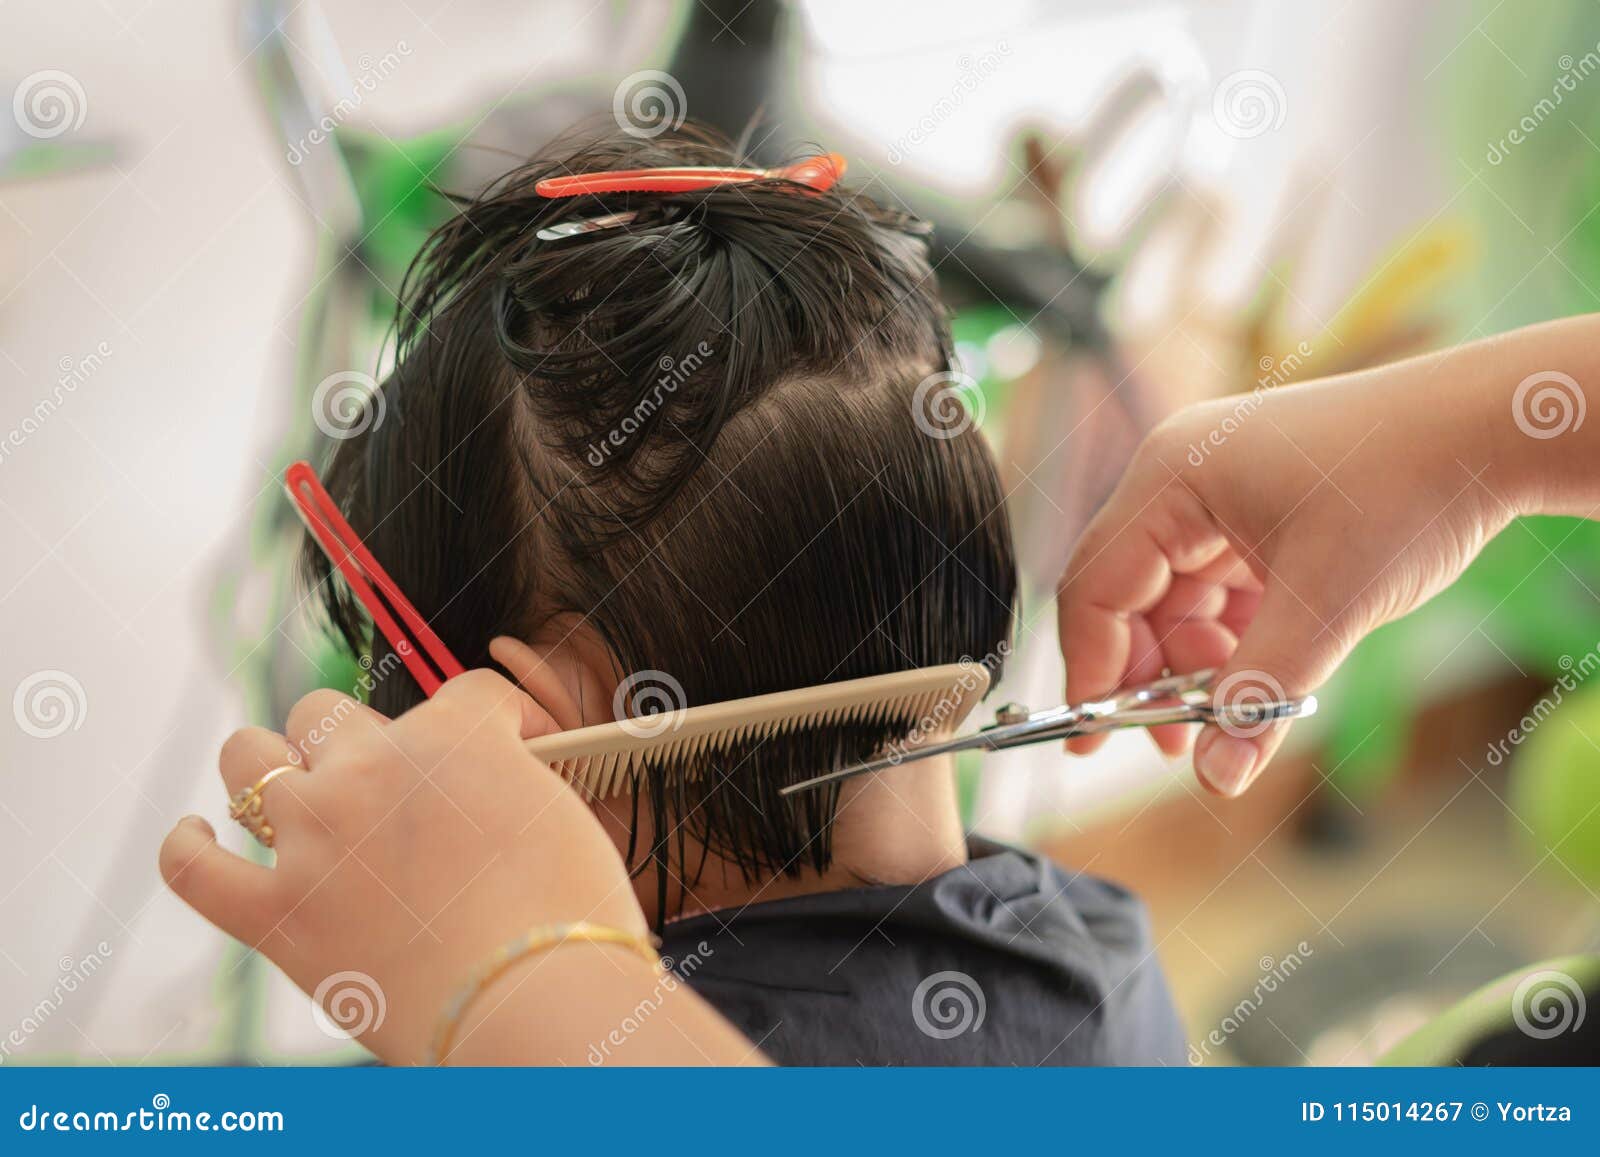 A Girl Hair Cut in Barber Salon Stock Image - Image of child, professional:  115014267